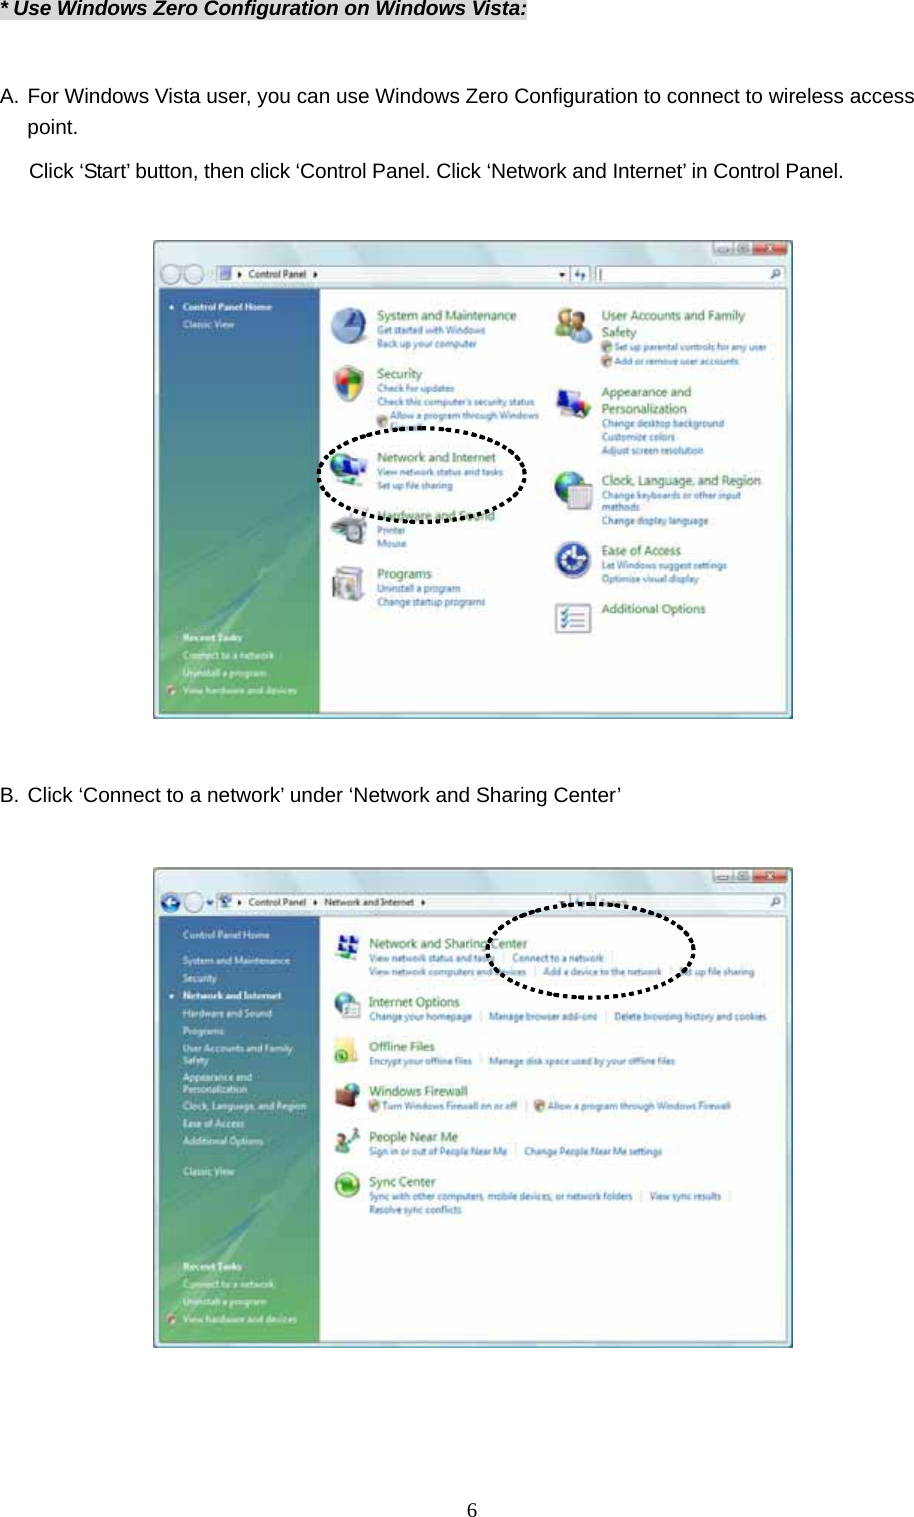  6 * Use Windows Zero Configuration on Windows Vista:  A. For Windows Vista user, you can use Windows Zero Configuration to connect to wireless access point. Click ‘Start’ button, then click ‘Control Panel. Click ‘Network and Internet’ in Control Panel.    B. Click ‘Connect to a network’ under ‘Network and Sharing Center’      